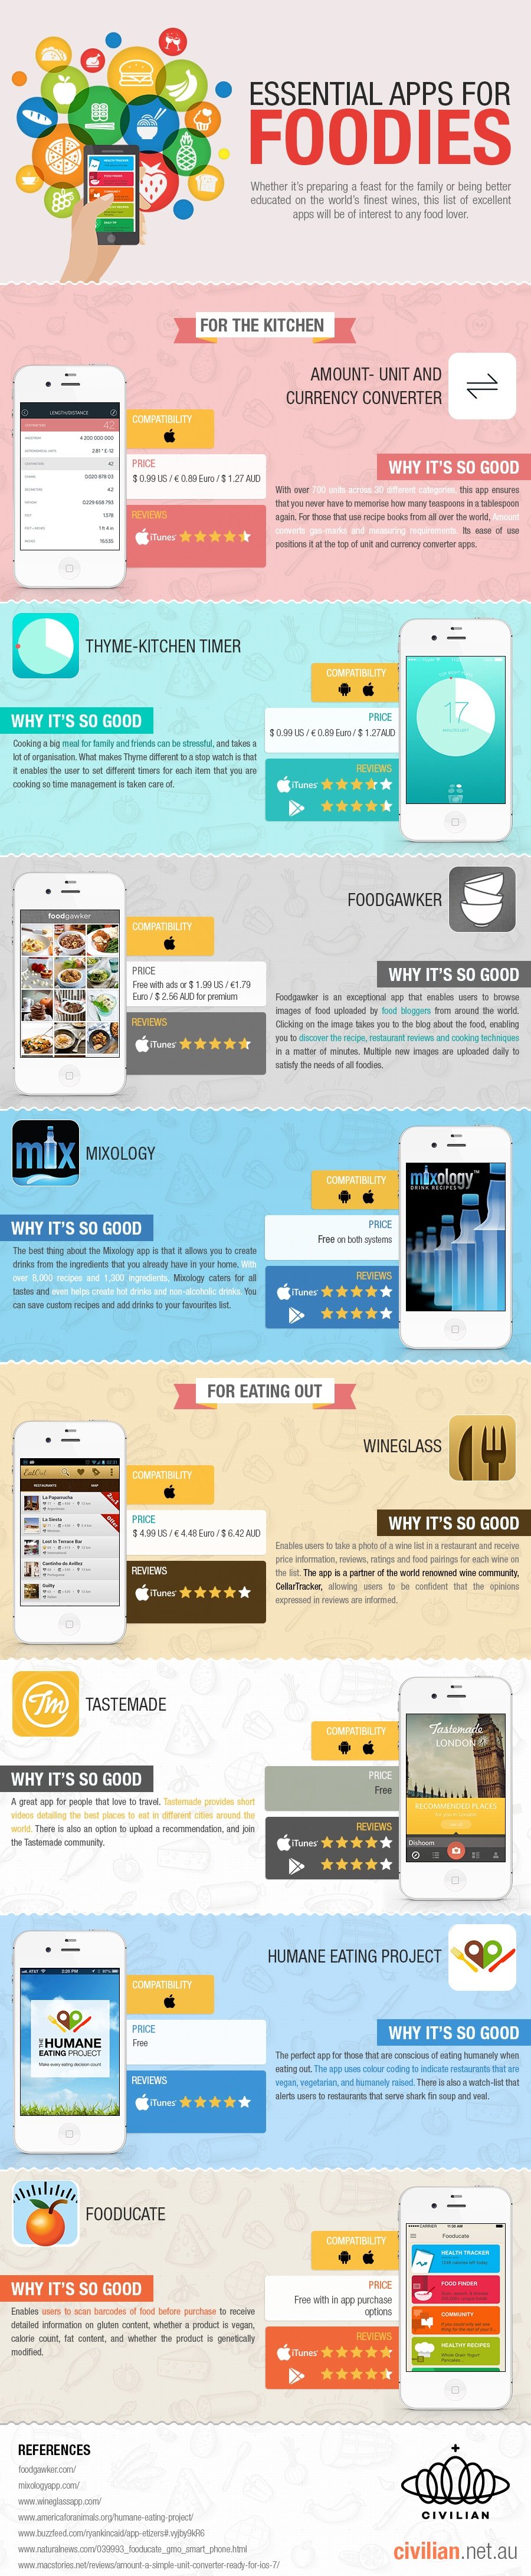 A-Infographic-on-Essential-Apps-for-Foodies